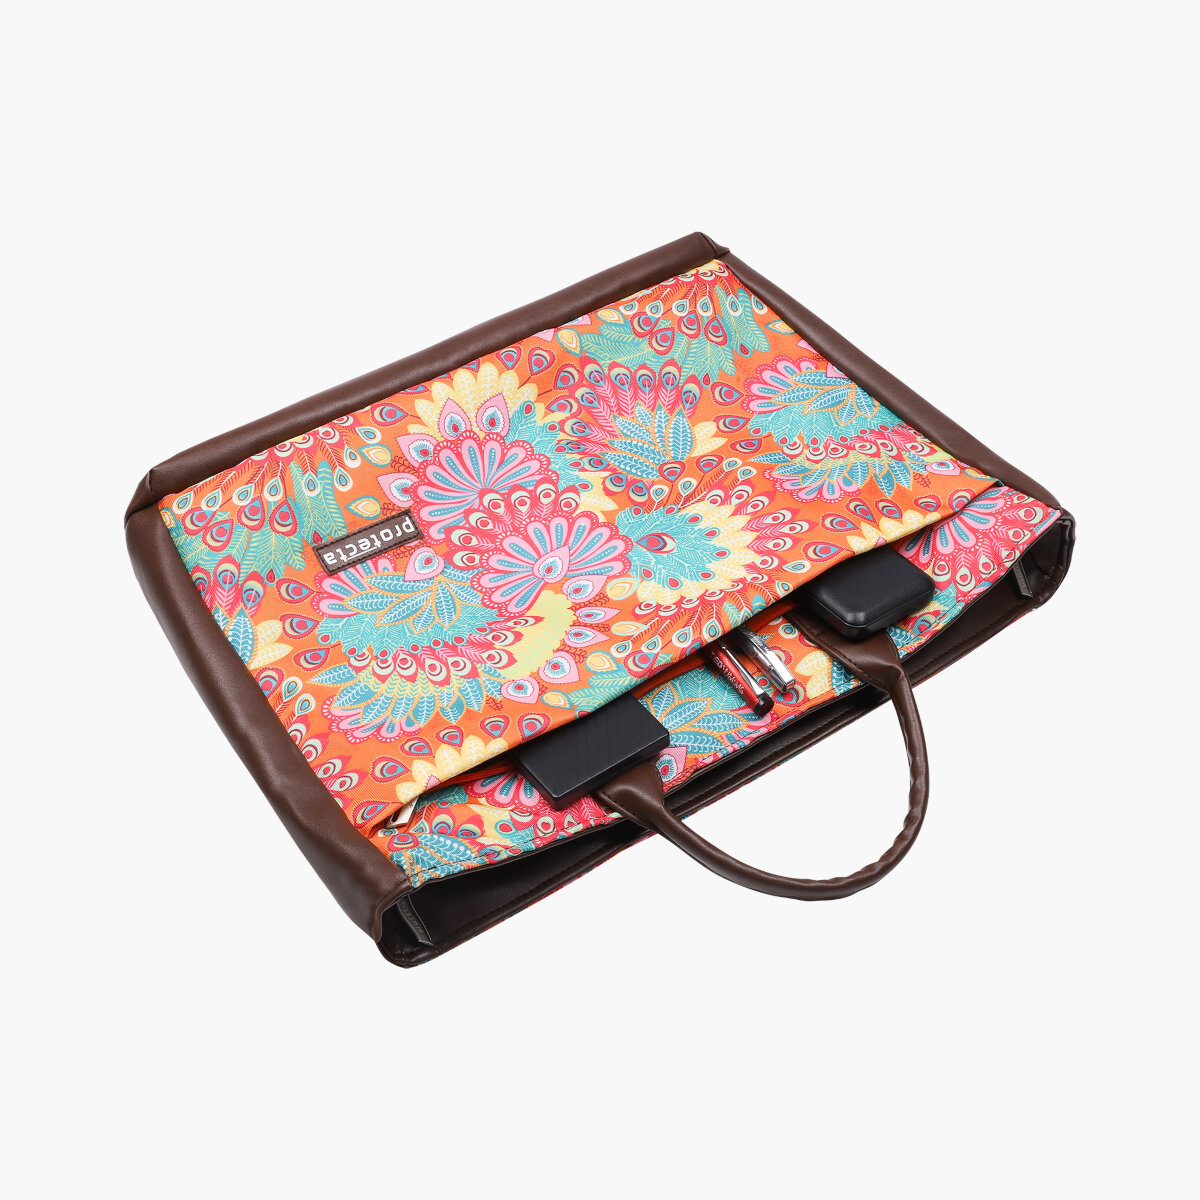 Paisley Print | Protecta Evenly Poised Office Laptop Bag for Women - 5